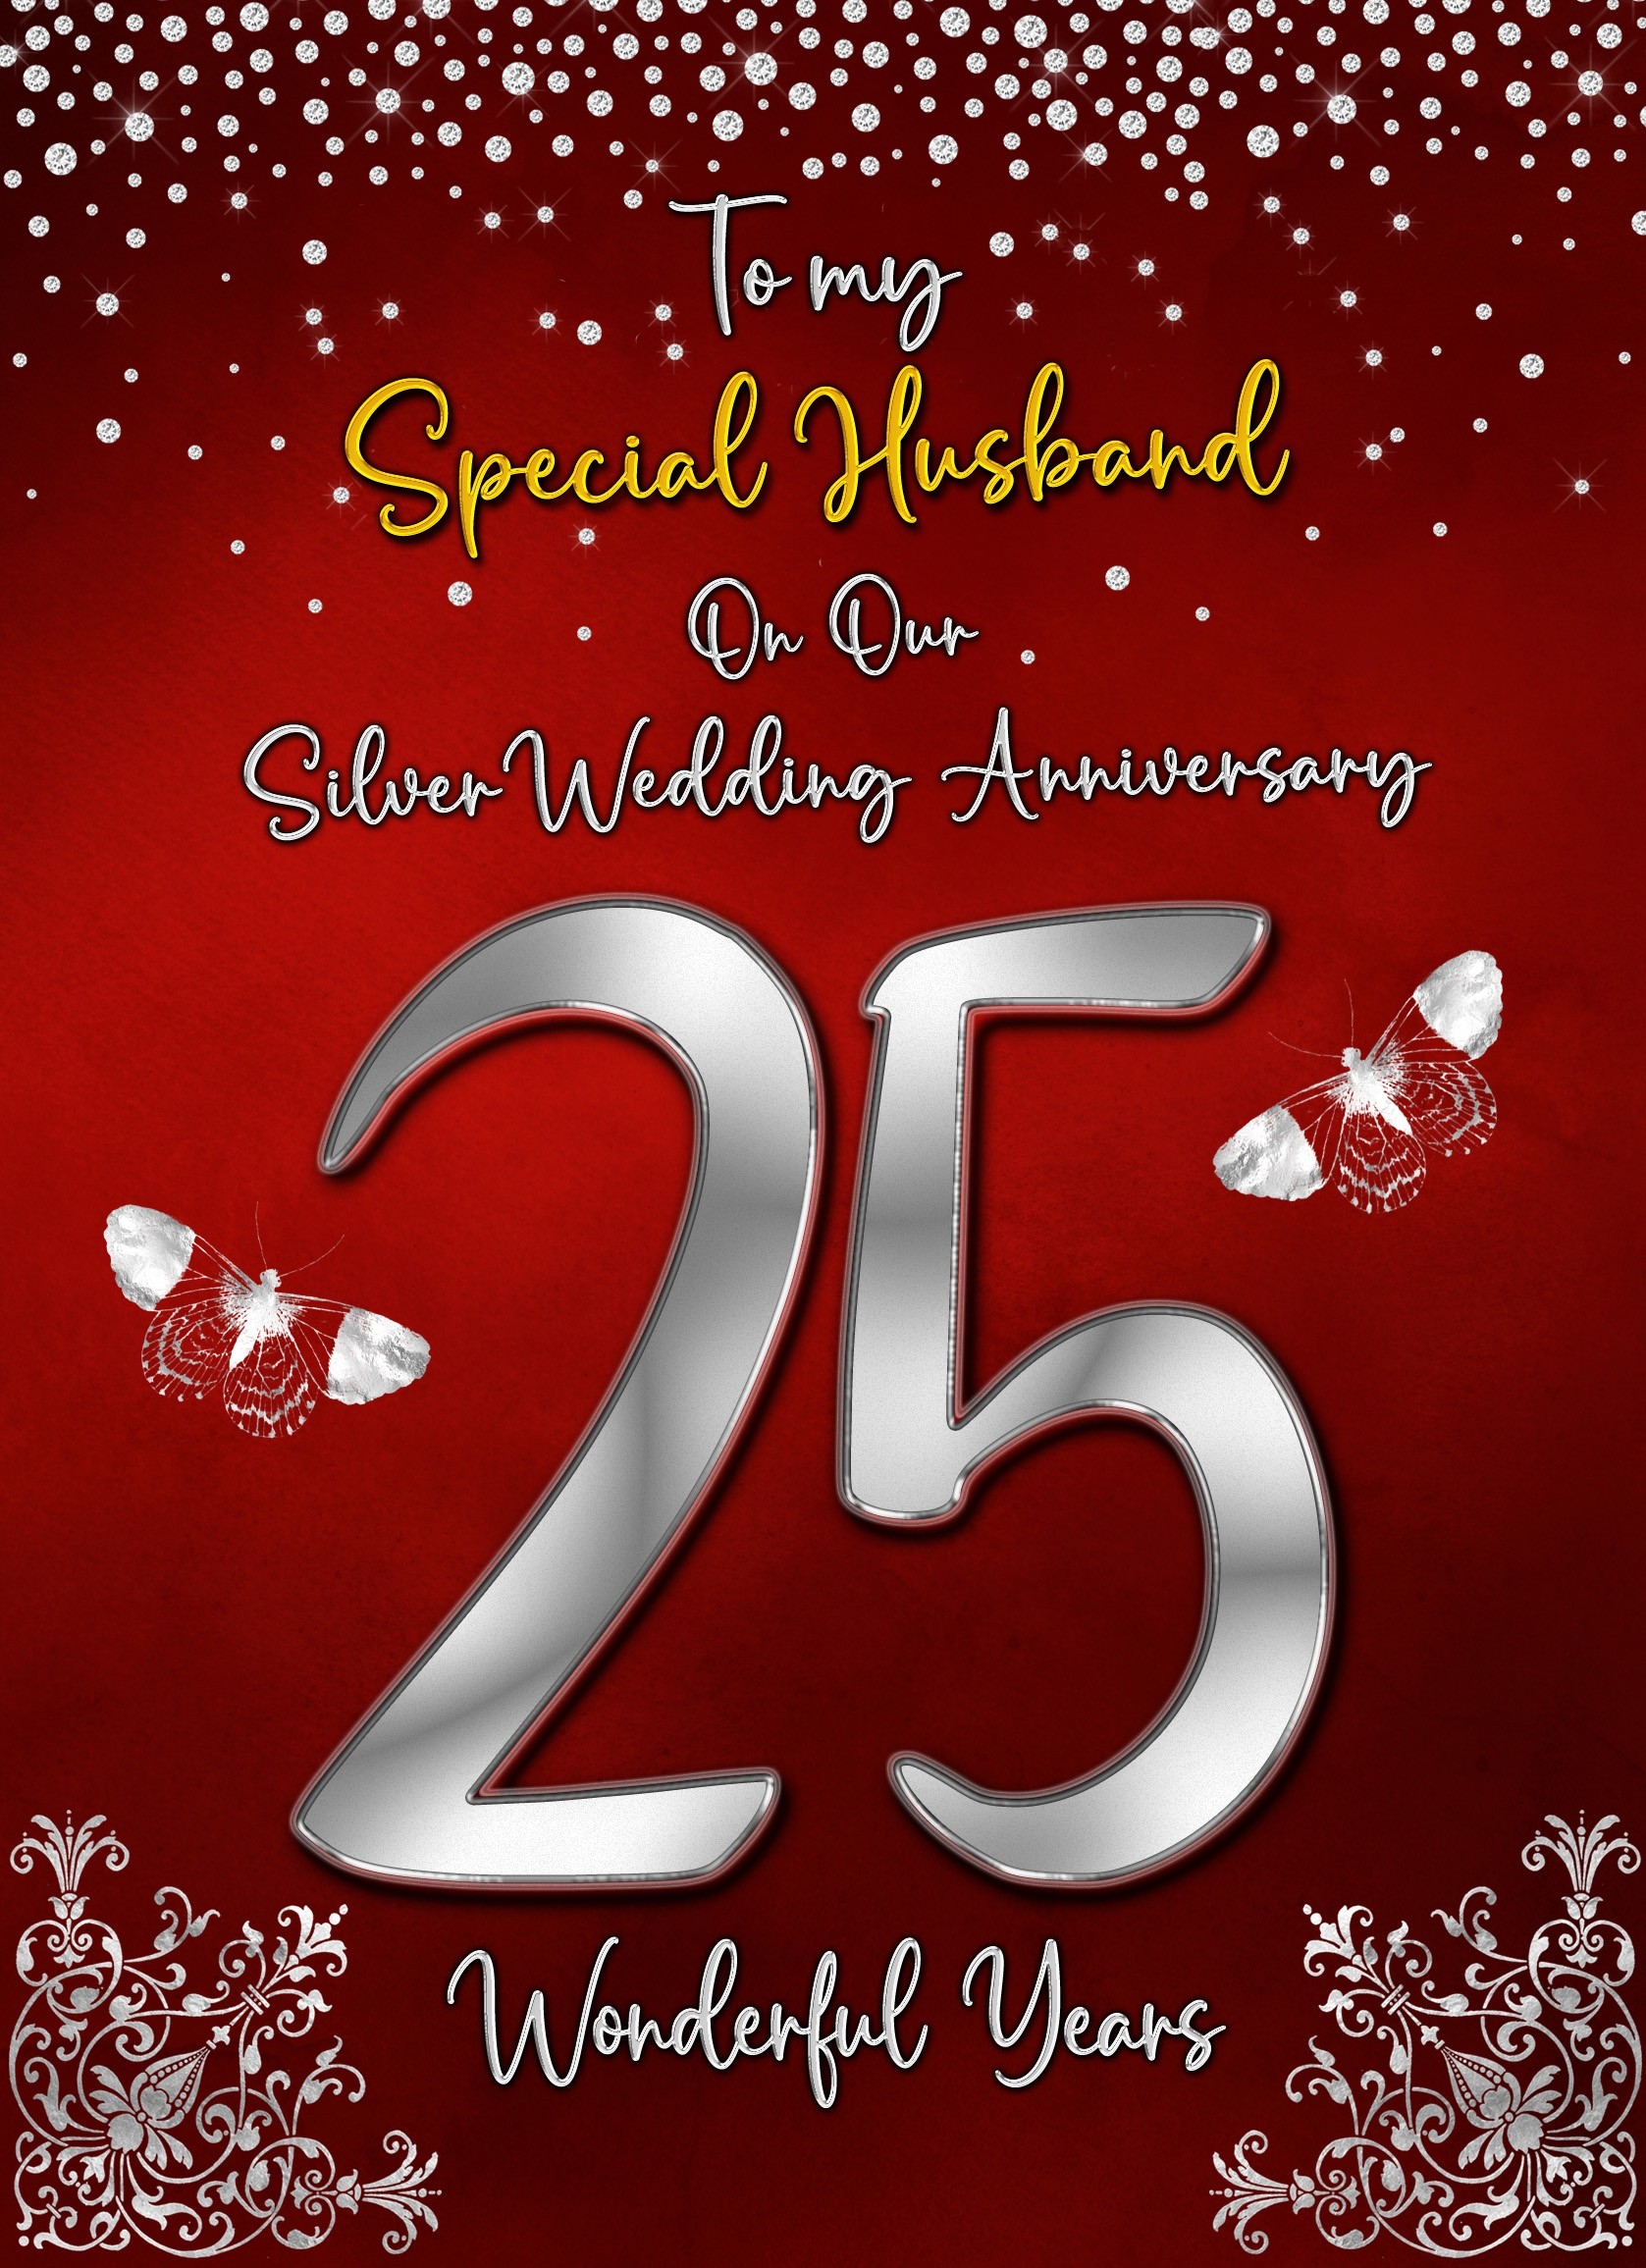 Silver 25th Wedding Anniversary Card (For Special Husband)